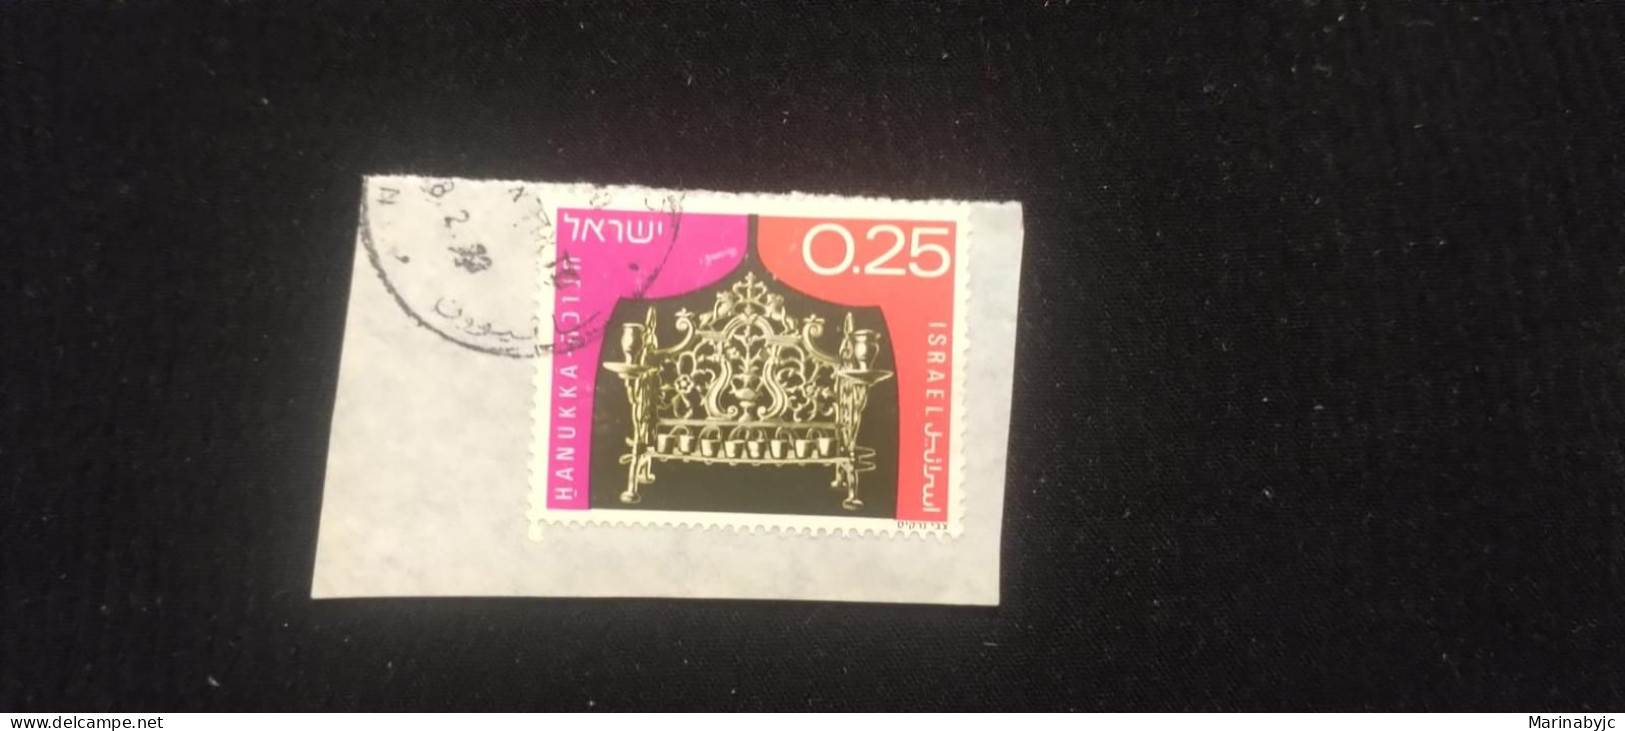 C) 569. 1972. ISRAEL. ENVELOPE SHEET WITH POLAND STAMP, 18TH CENTURY, BRASS. UC. USED. - Andere-Azië